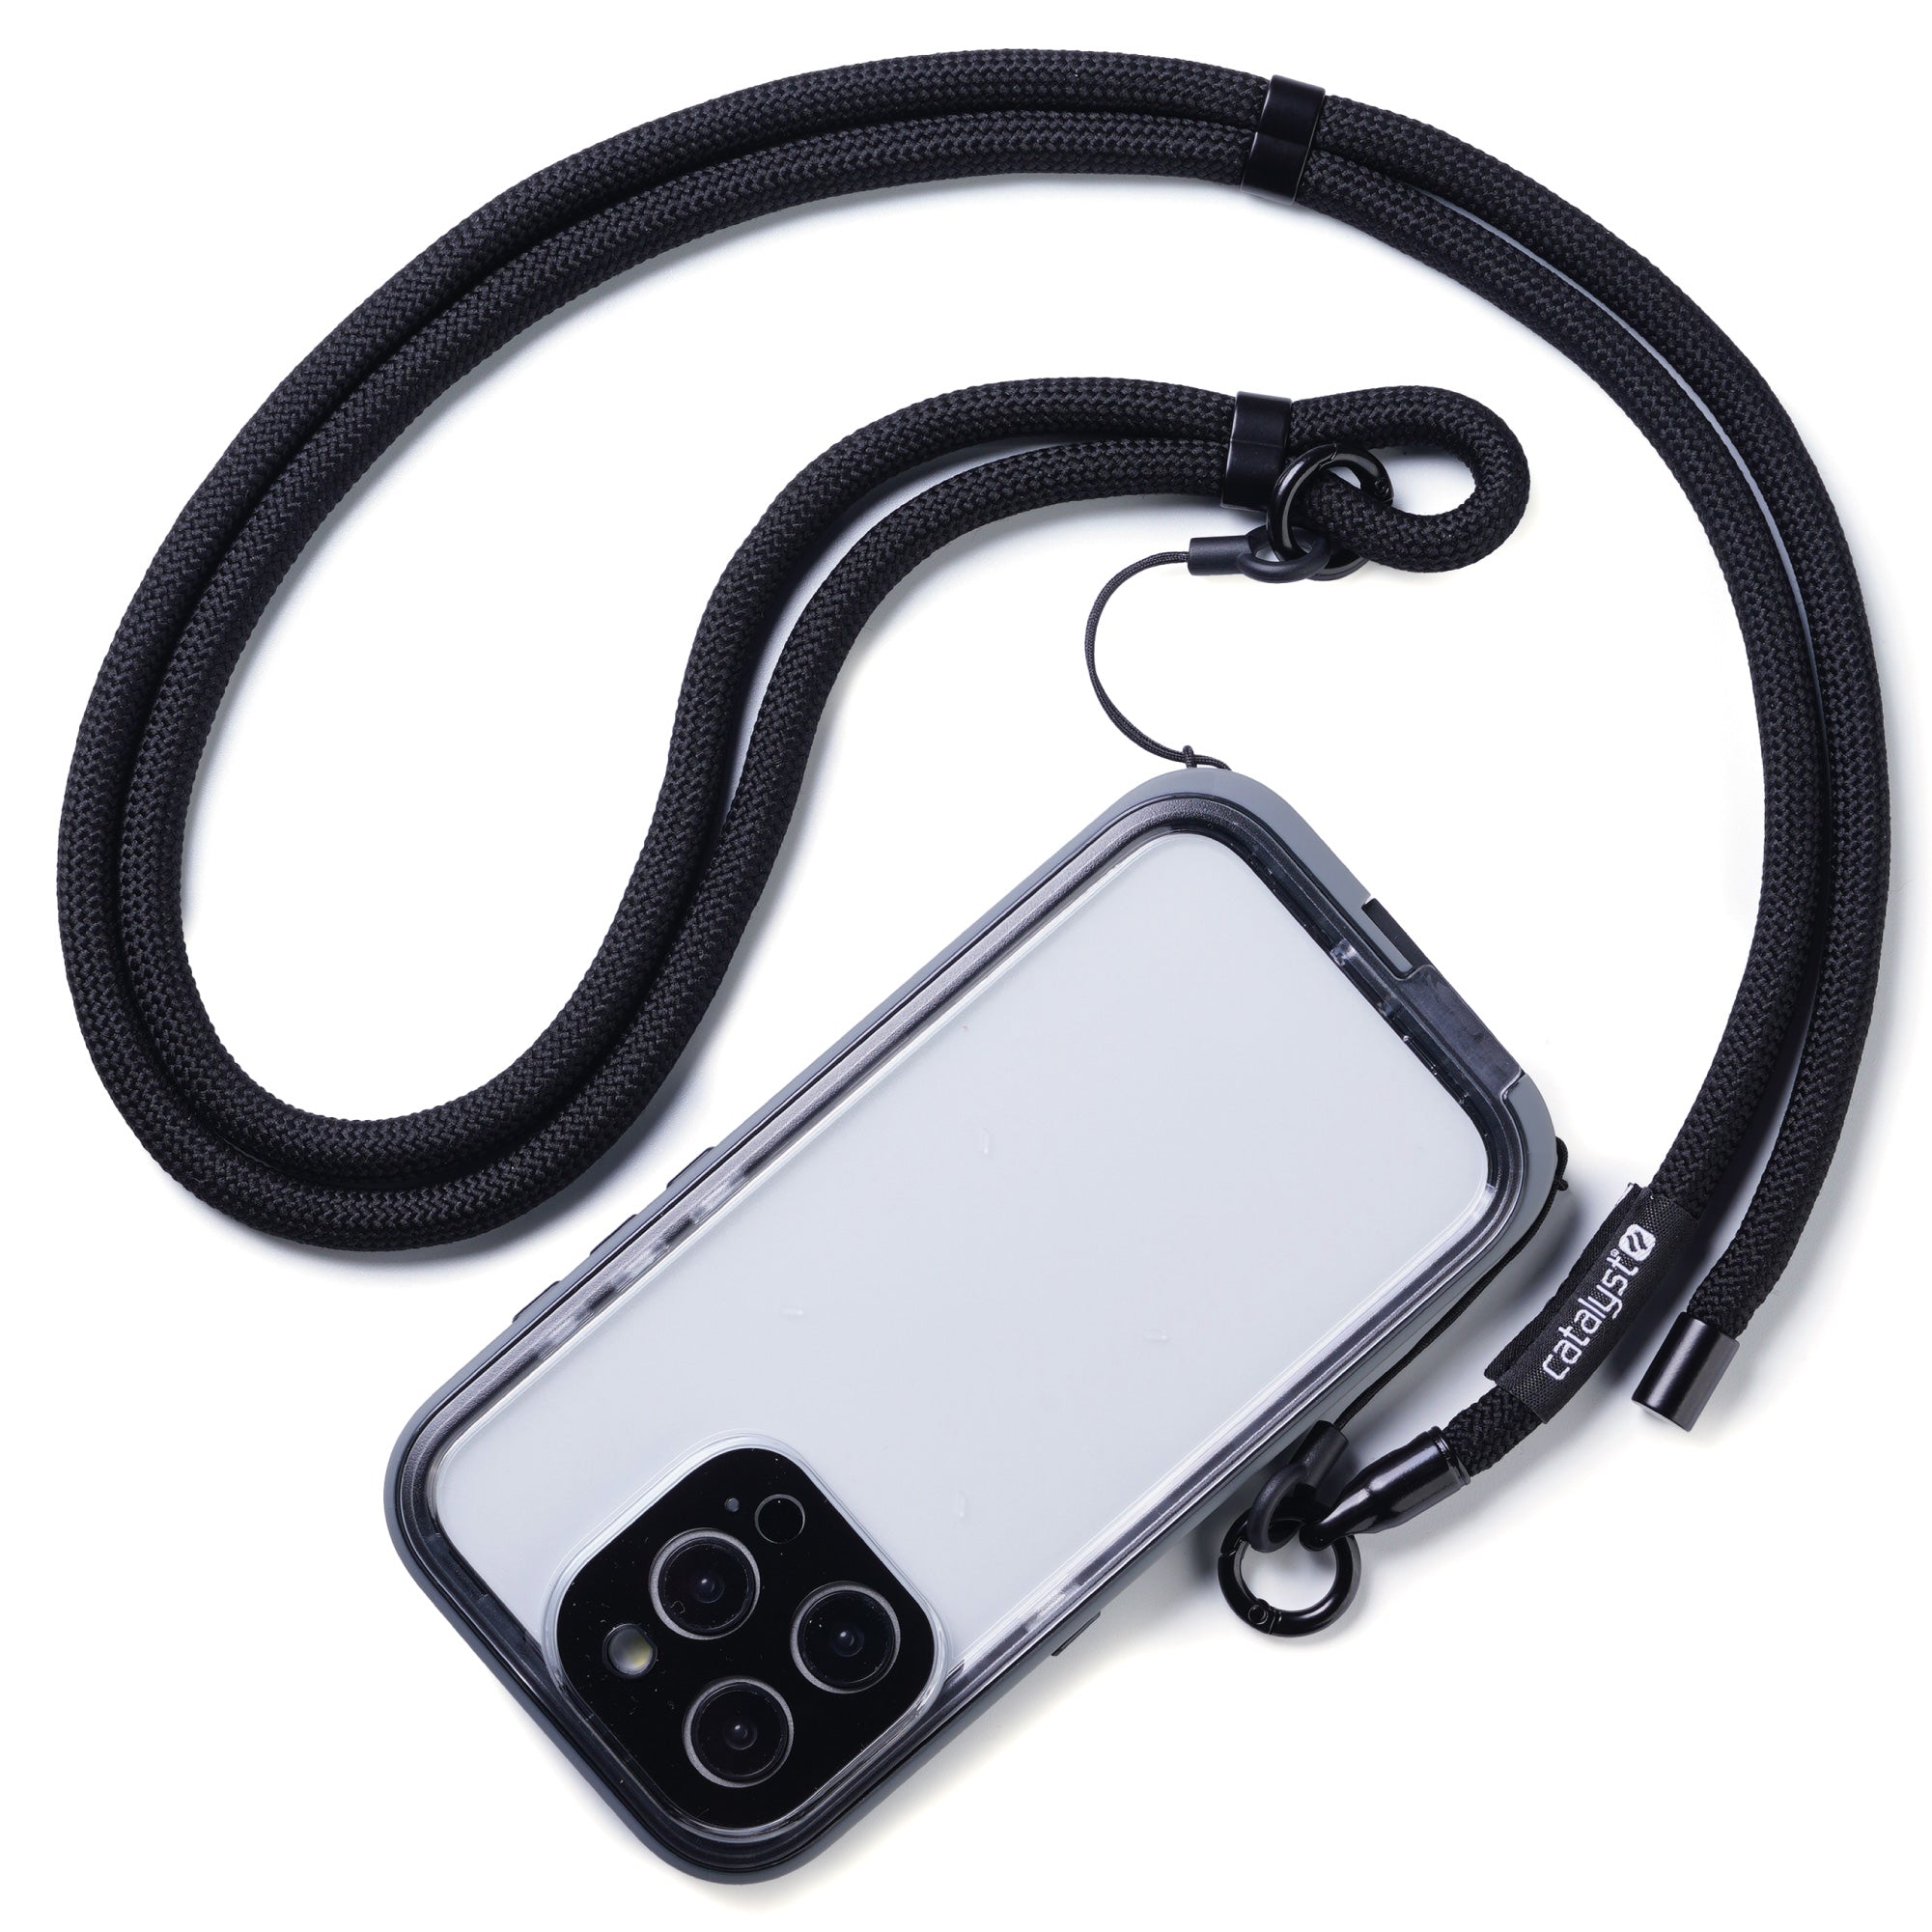 CATNECKLANBLK-FBA | Catalyst-Crossbody-Shoulder-Strap-attached-to-Waterproof-Case-for-iPhone-Hero-Listing-Black